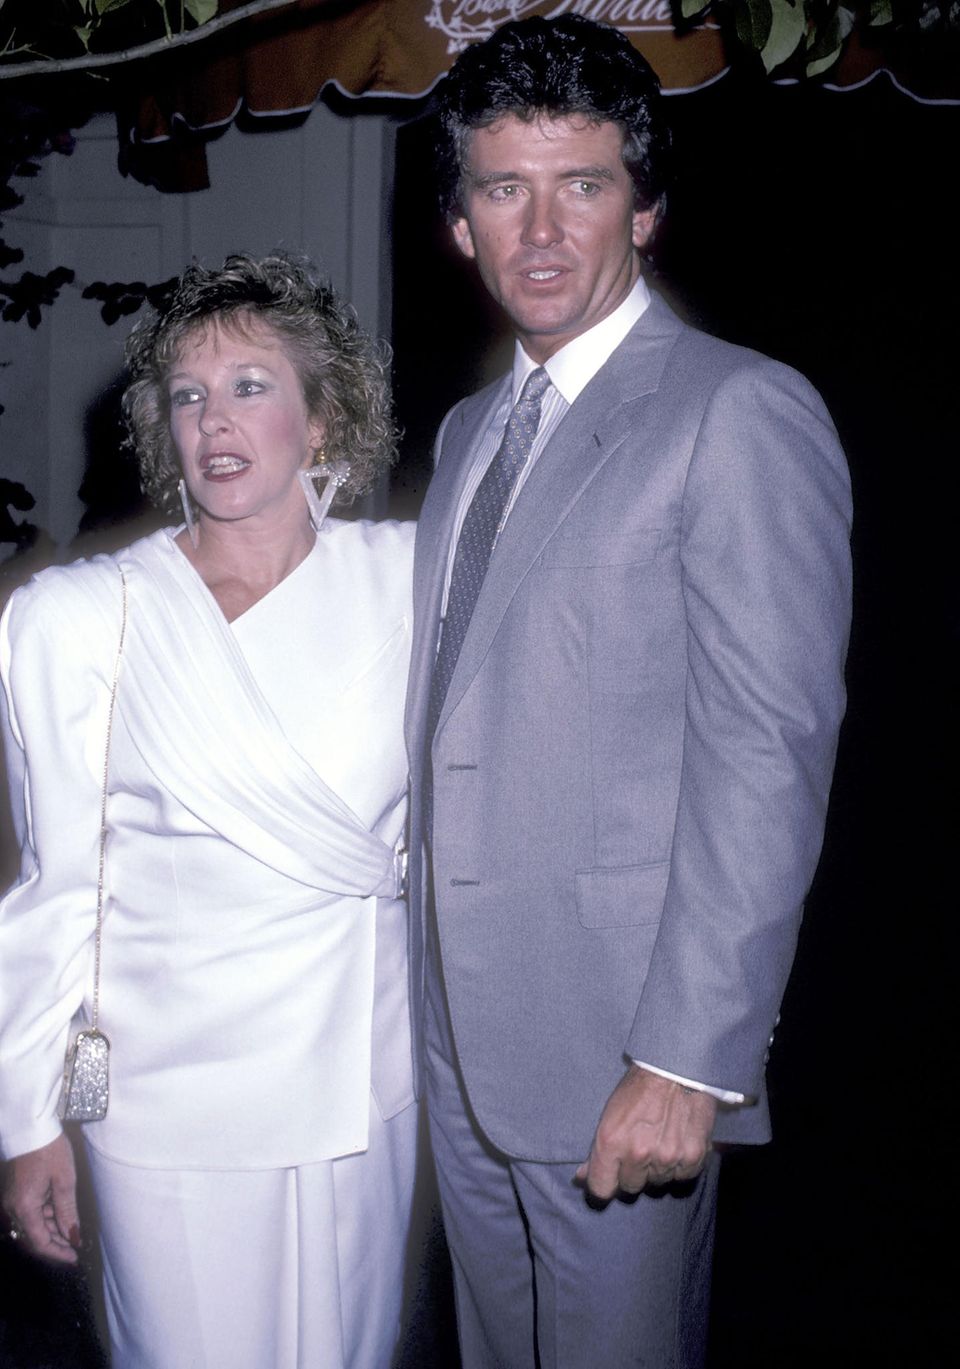 Patrick Duffy in June 1986 with his wife Carlyn (†) - five months before the brutal murder of his parents.